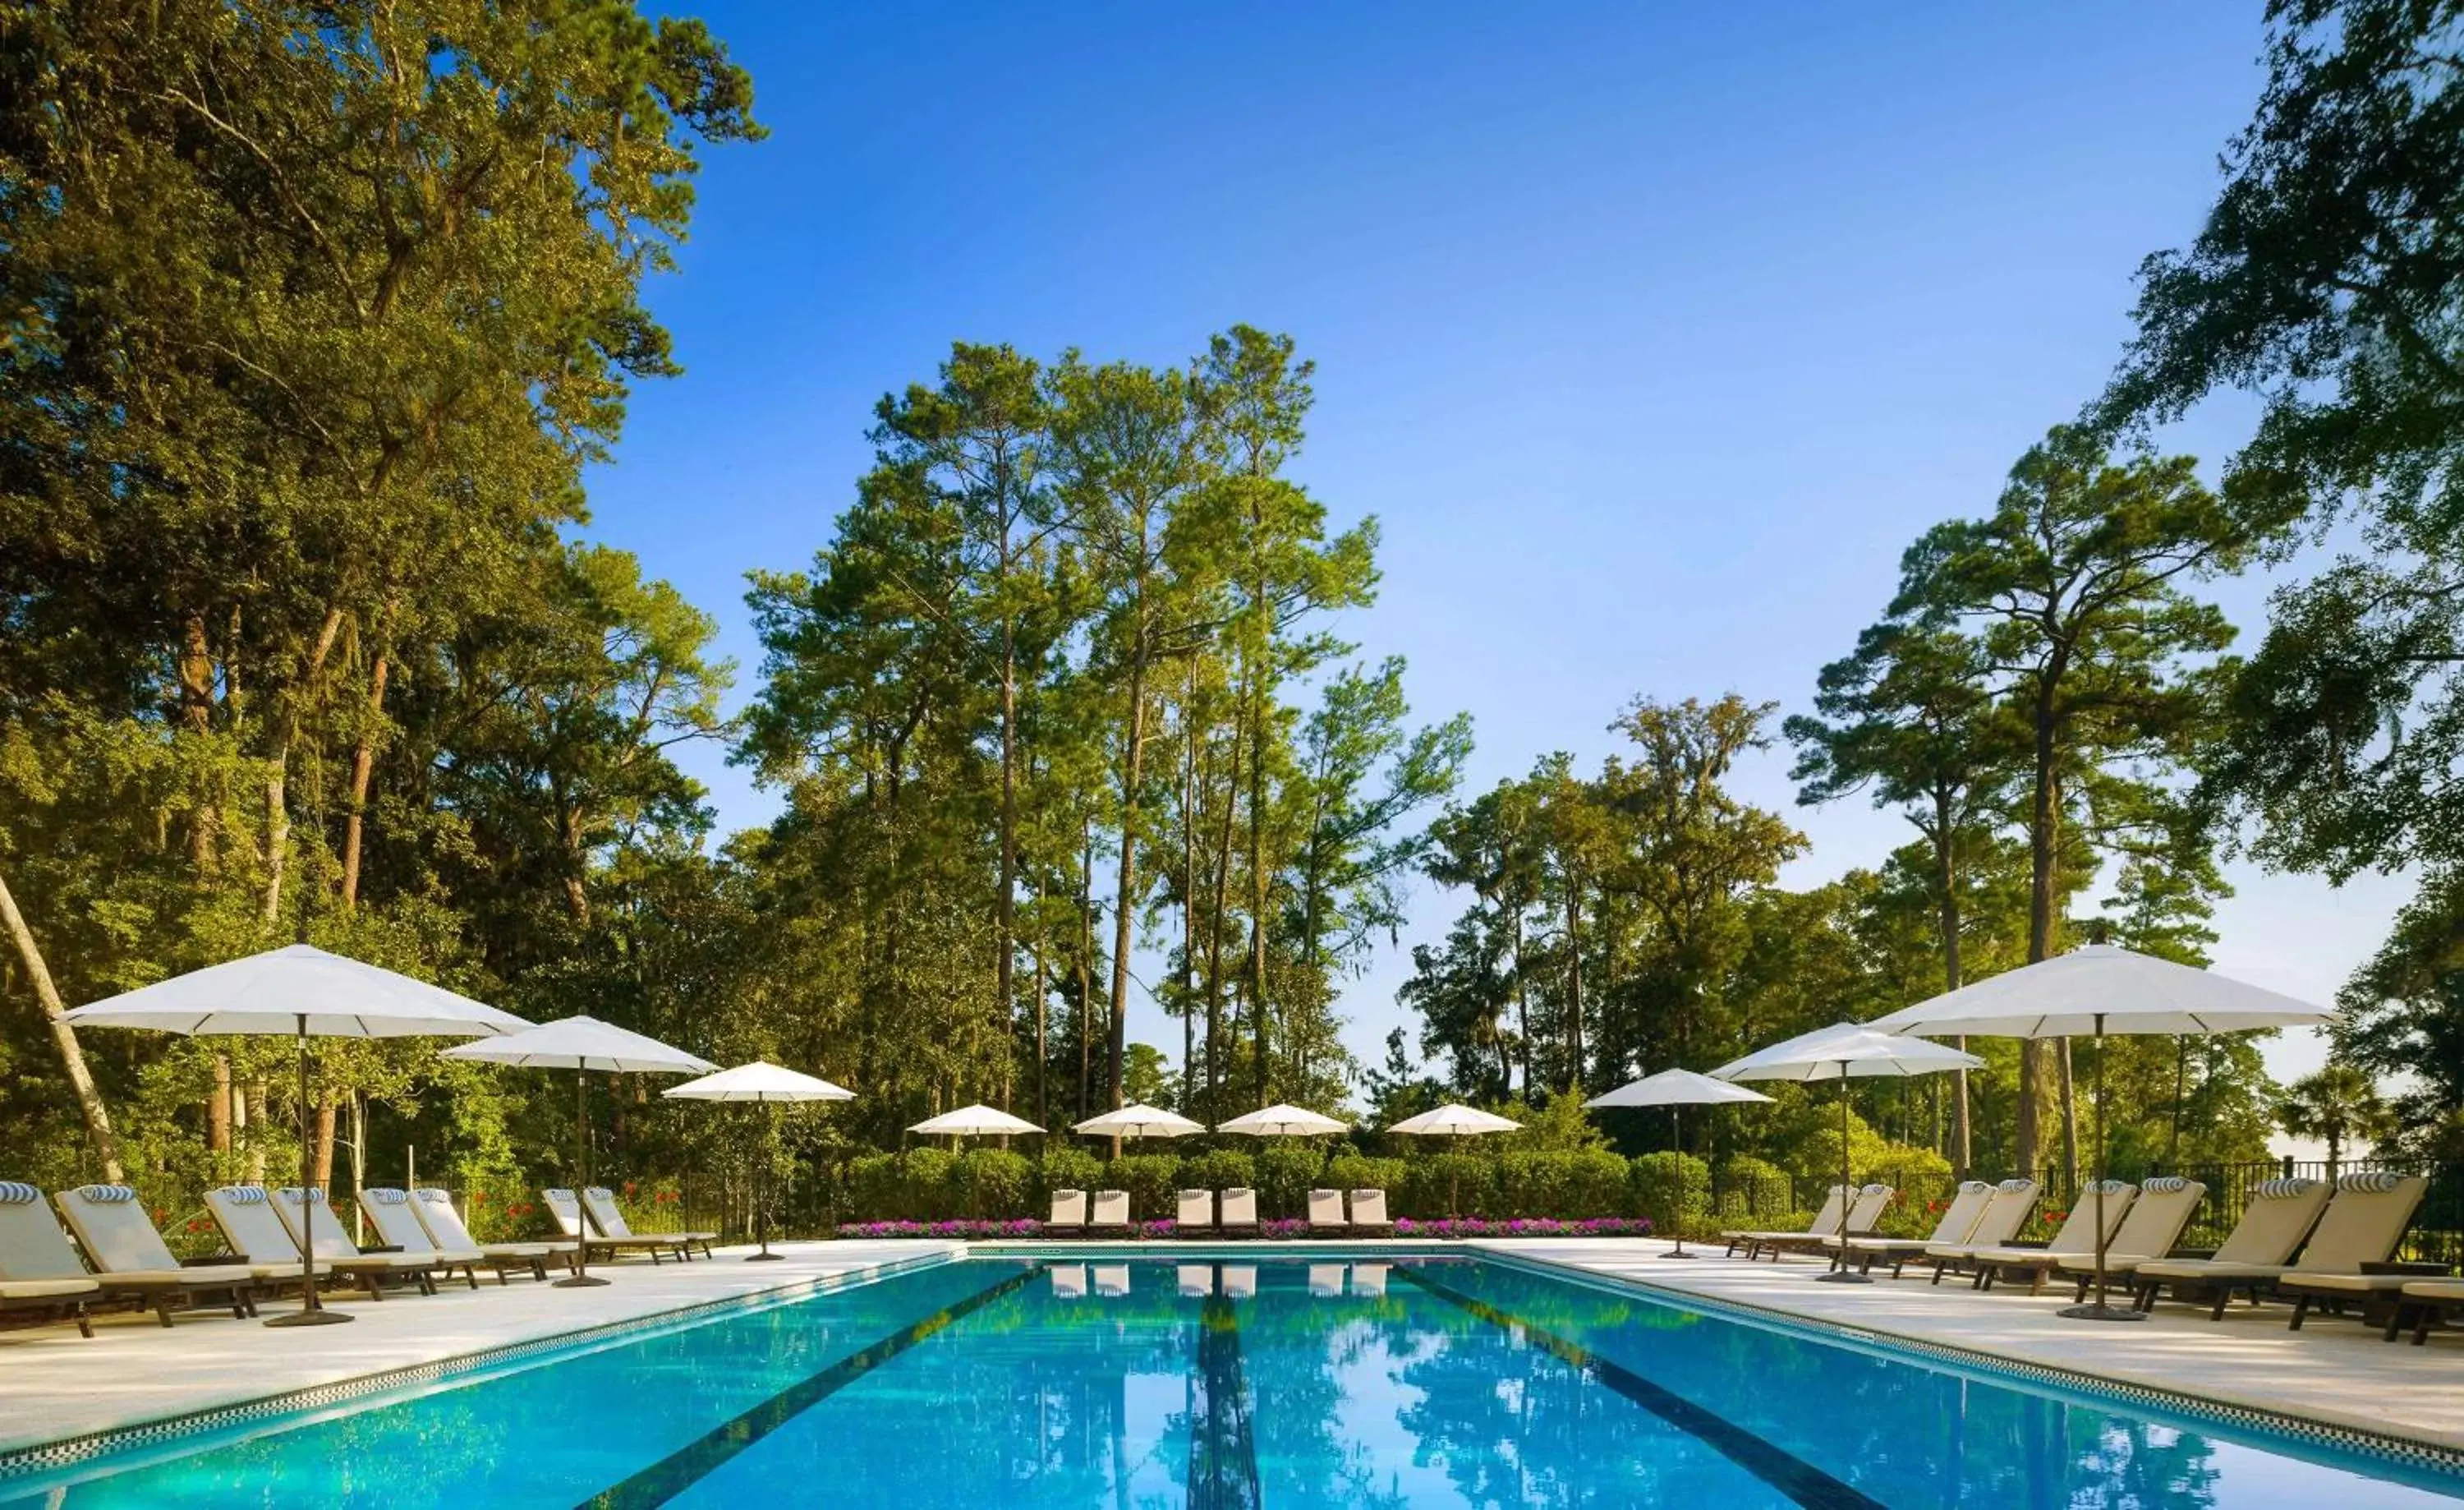 Property building, Swimming Pool in Montage Palmetto Bluff